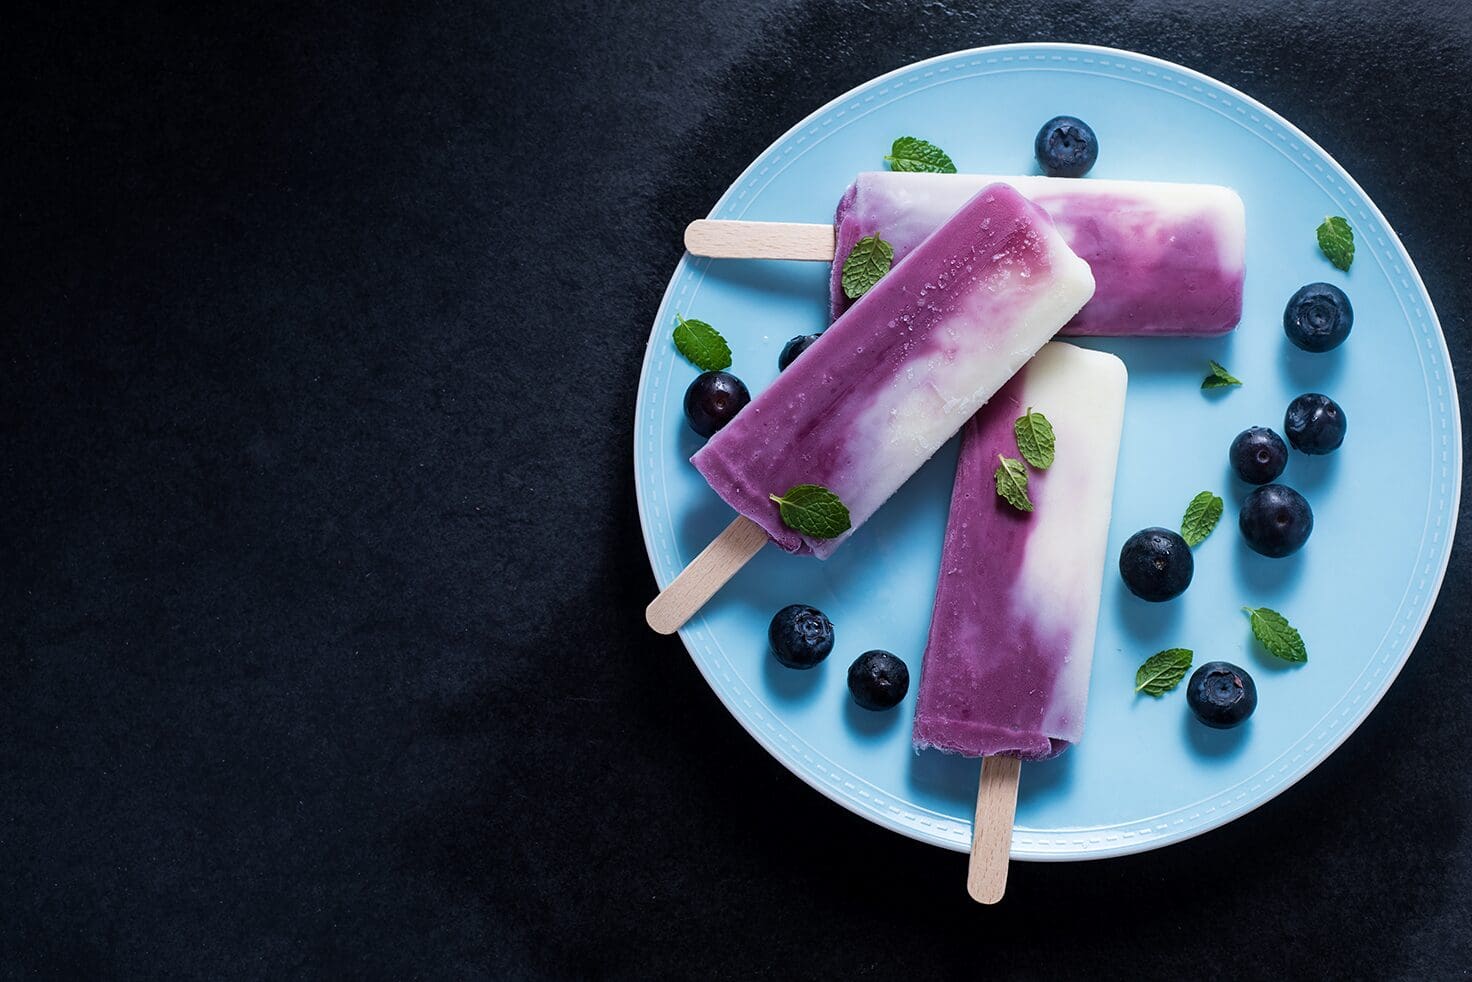 Kate’s healthy ice cream and fruit popsicles